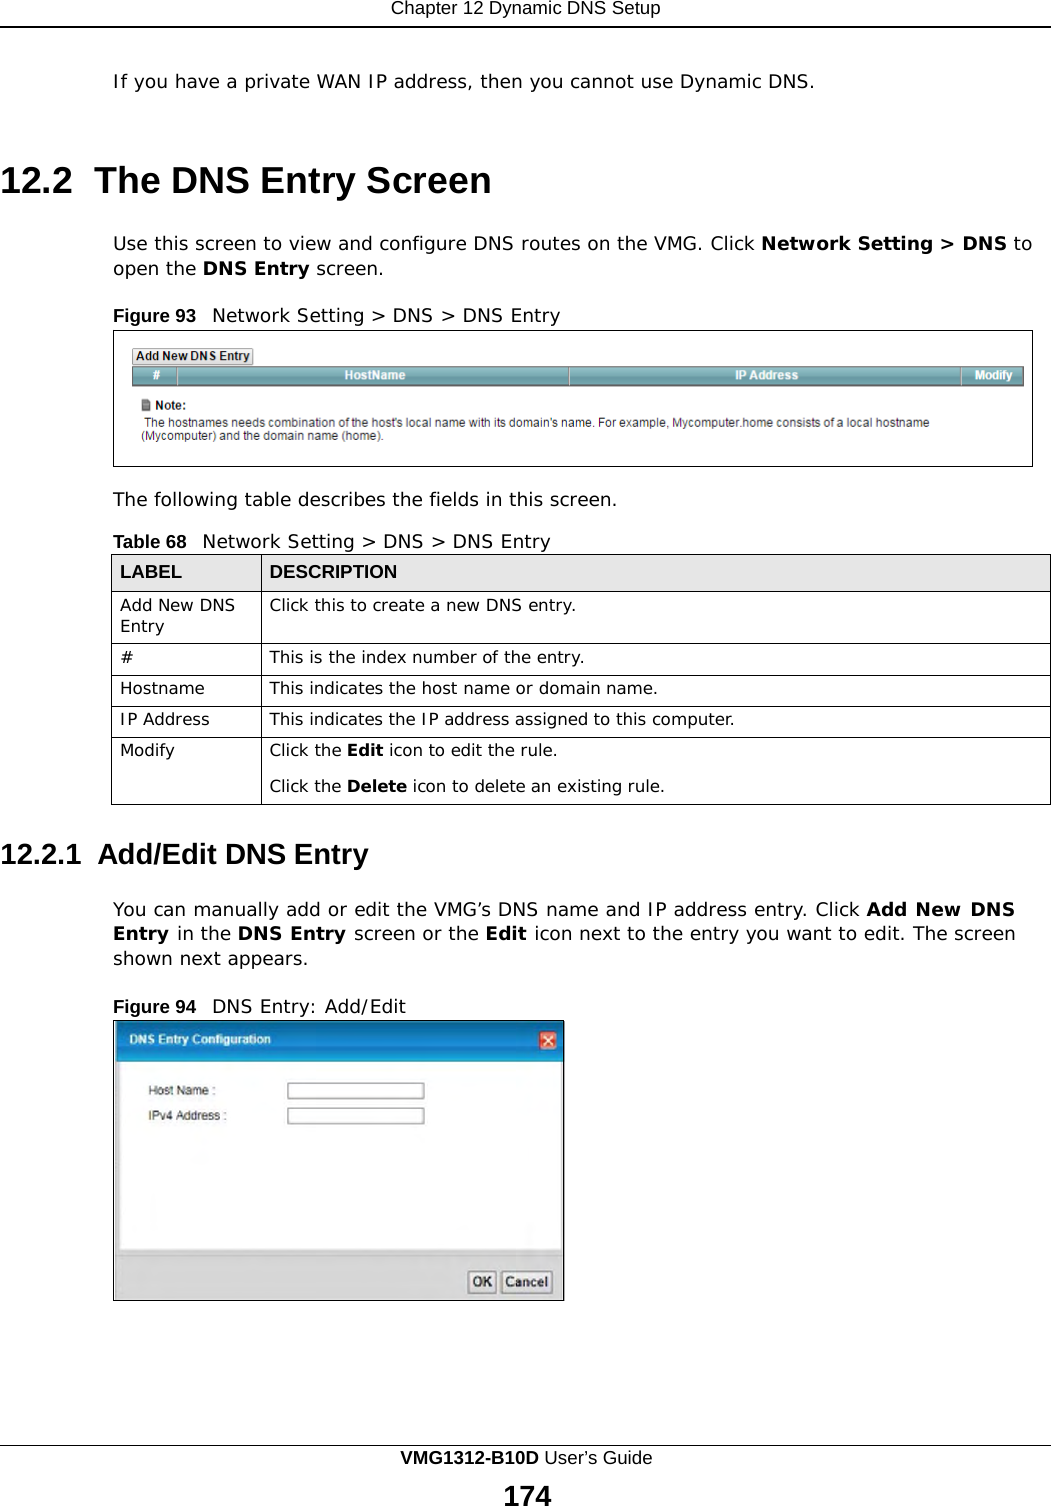 Chapter 12 Dynamic DNS Setup        If you have a private WAN IP address, then you cannot use Dynamic DNS.    12.2 The DNS Entry Screen  Use this screen to view and configure DNS routes on the VMG. Click Network Setting &gt; DNS to open the DNS Entry screen.  Figure 93   Network Setting &gt; DNS &gt; DNS Entry         The following table describes the fields in this screen.  Table 68   Network Setting &gt; DNS &gt; DNS Entry  LABEL DESCRIPTION Add New DNS Entry Click this to create a new DNS entry. # This is the index number of the entry. Hostname This indicates the host name or domain name. IP Address This indicates the IP address assigned to this computer. Modify Click the Edit icon to edit the rule.  Click the Delete icon to delete an existing rule.  12.2.1 Add/Edit DNS Entry  You can manually add or edit the VMG’s DNS name and IP address entry. Click Add New DNS Entry in the DNS Entry screen or the Edit icon next to the entry you want to edit. The screen shown next appears.  Figure 94   DNS Entry: Add/Edit VMG1312-B10D User’s Guide 174  